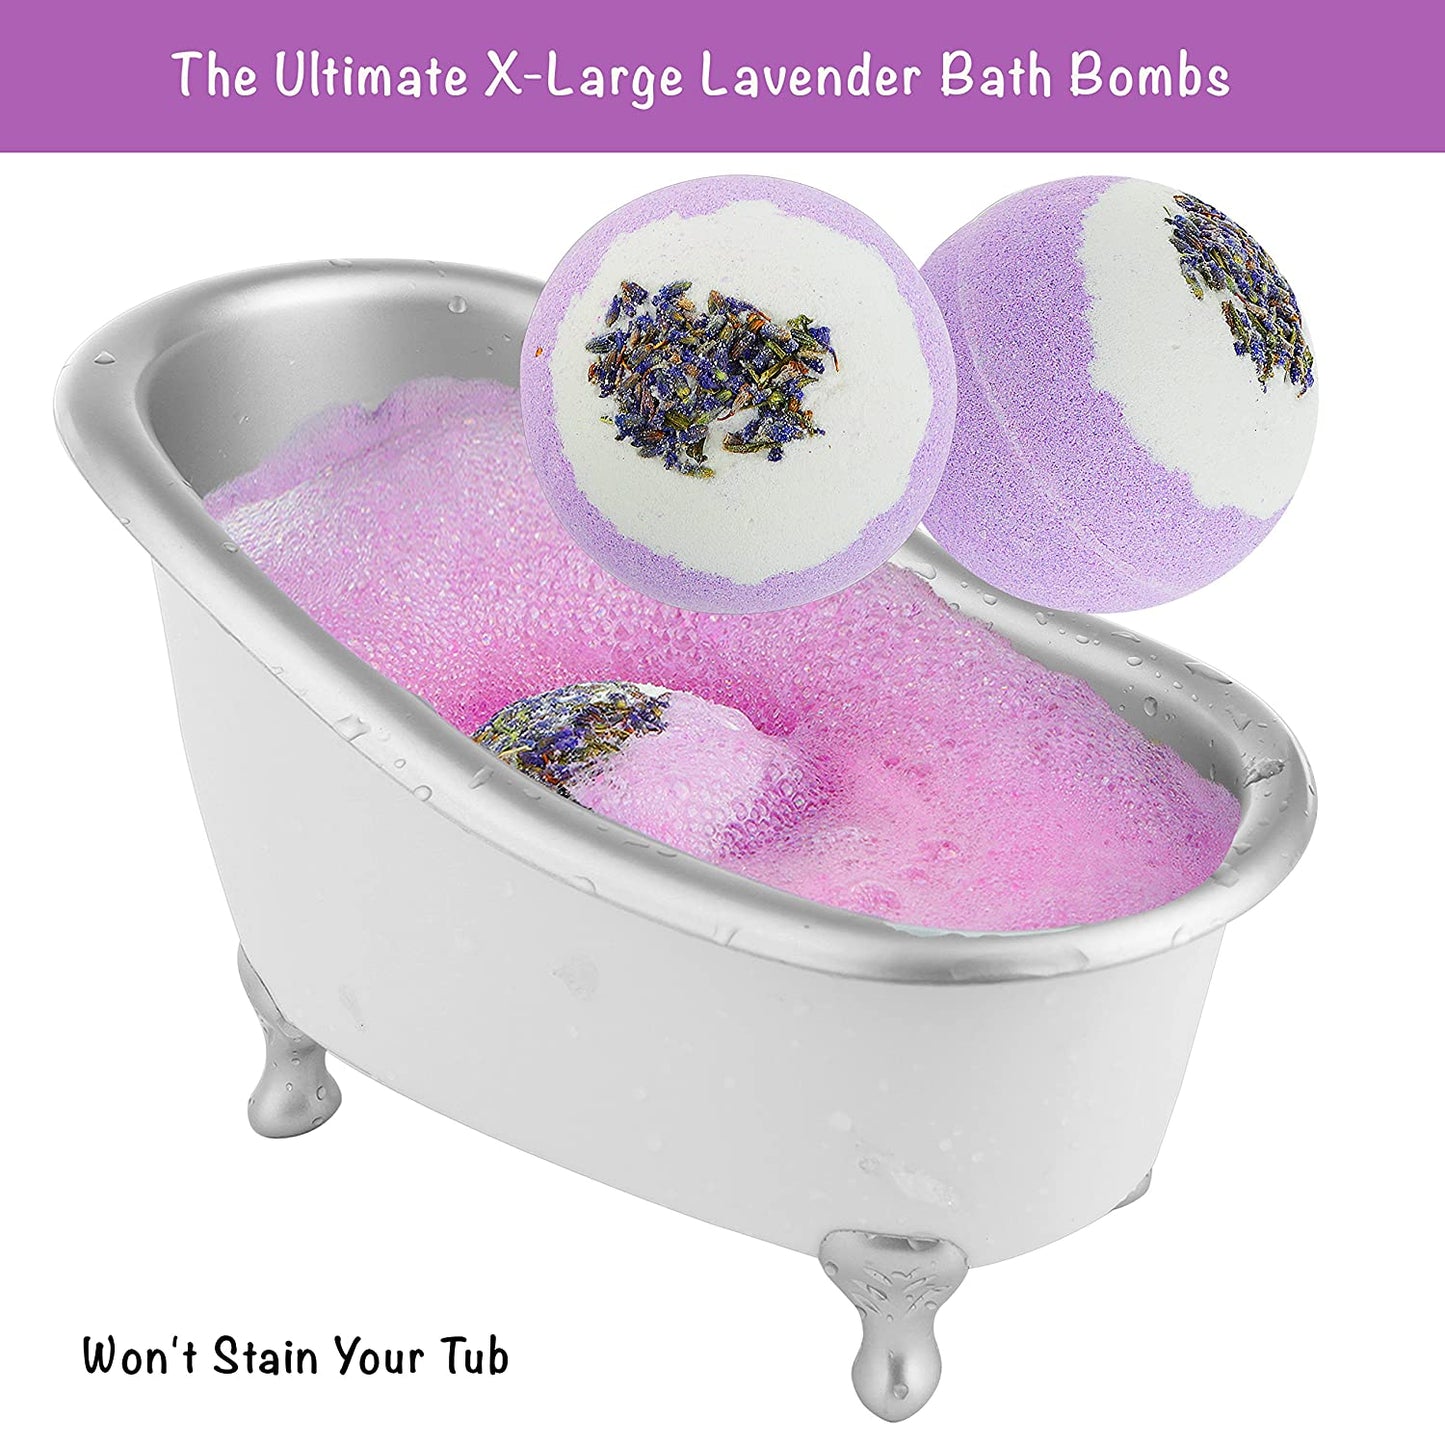 Lovery bath gift set, bath gift set, Ultimate X-Large Lavender Bath Bombs, Luxury Body Care Collection, Exquisite Bath Aromas, Soothing Fragrance Essentials, 2-Piece Bath Bomb Gift, Travel-Size Spa Kit, Lavender Beauty, Silver Display Bathtub Presentation, Paraben-Free Spa Essentials, Cruelty-Free Spa Care